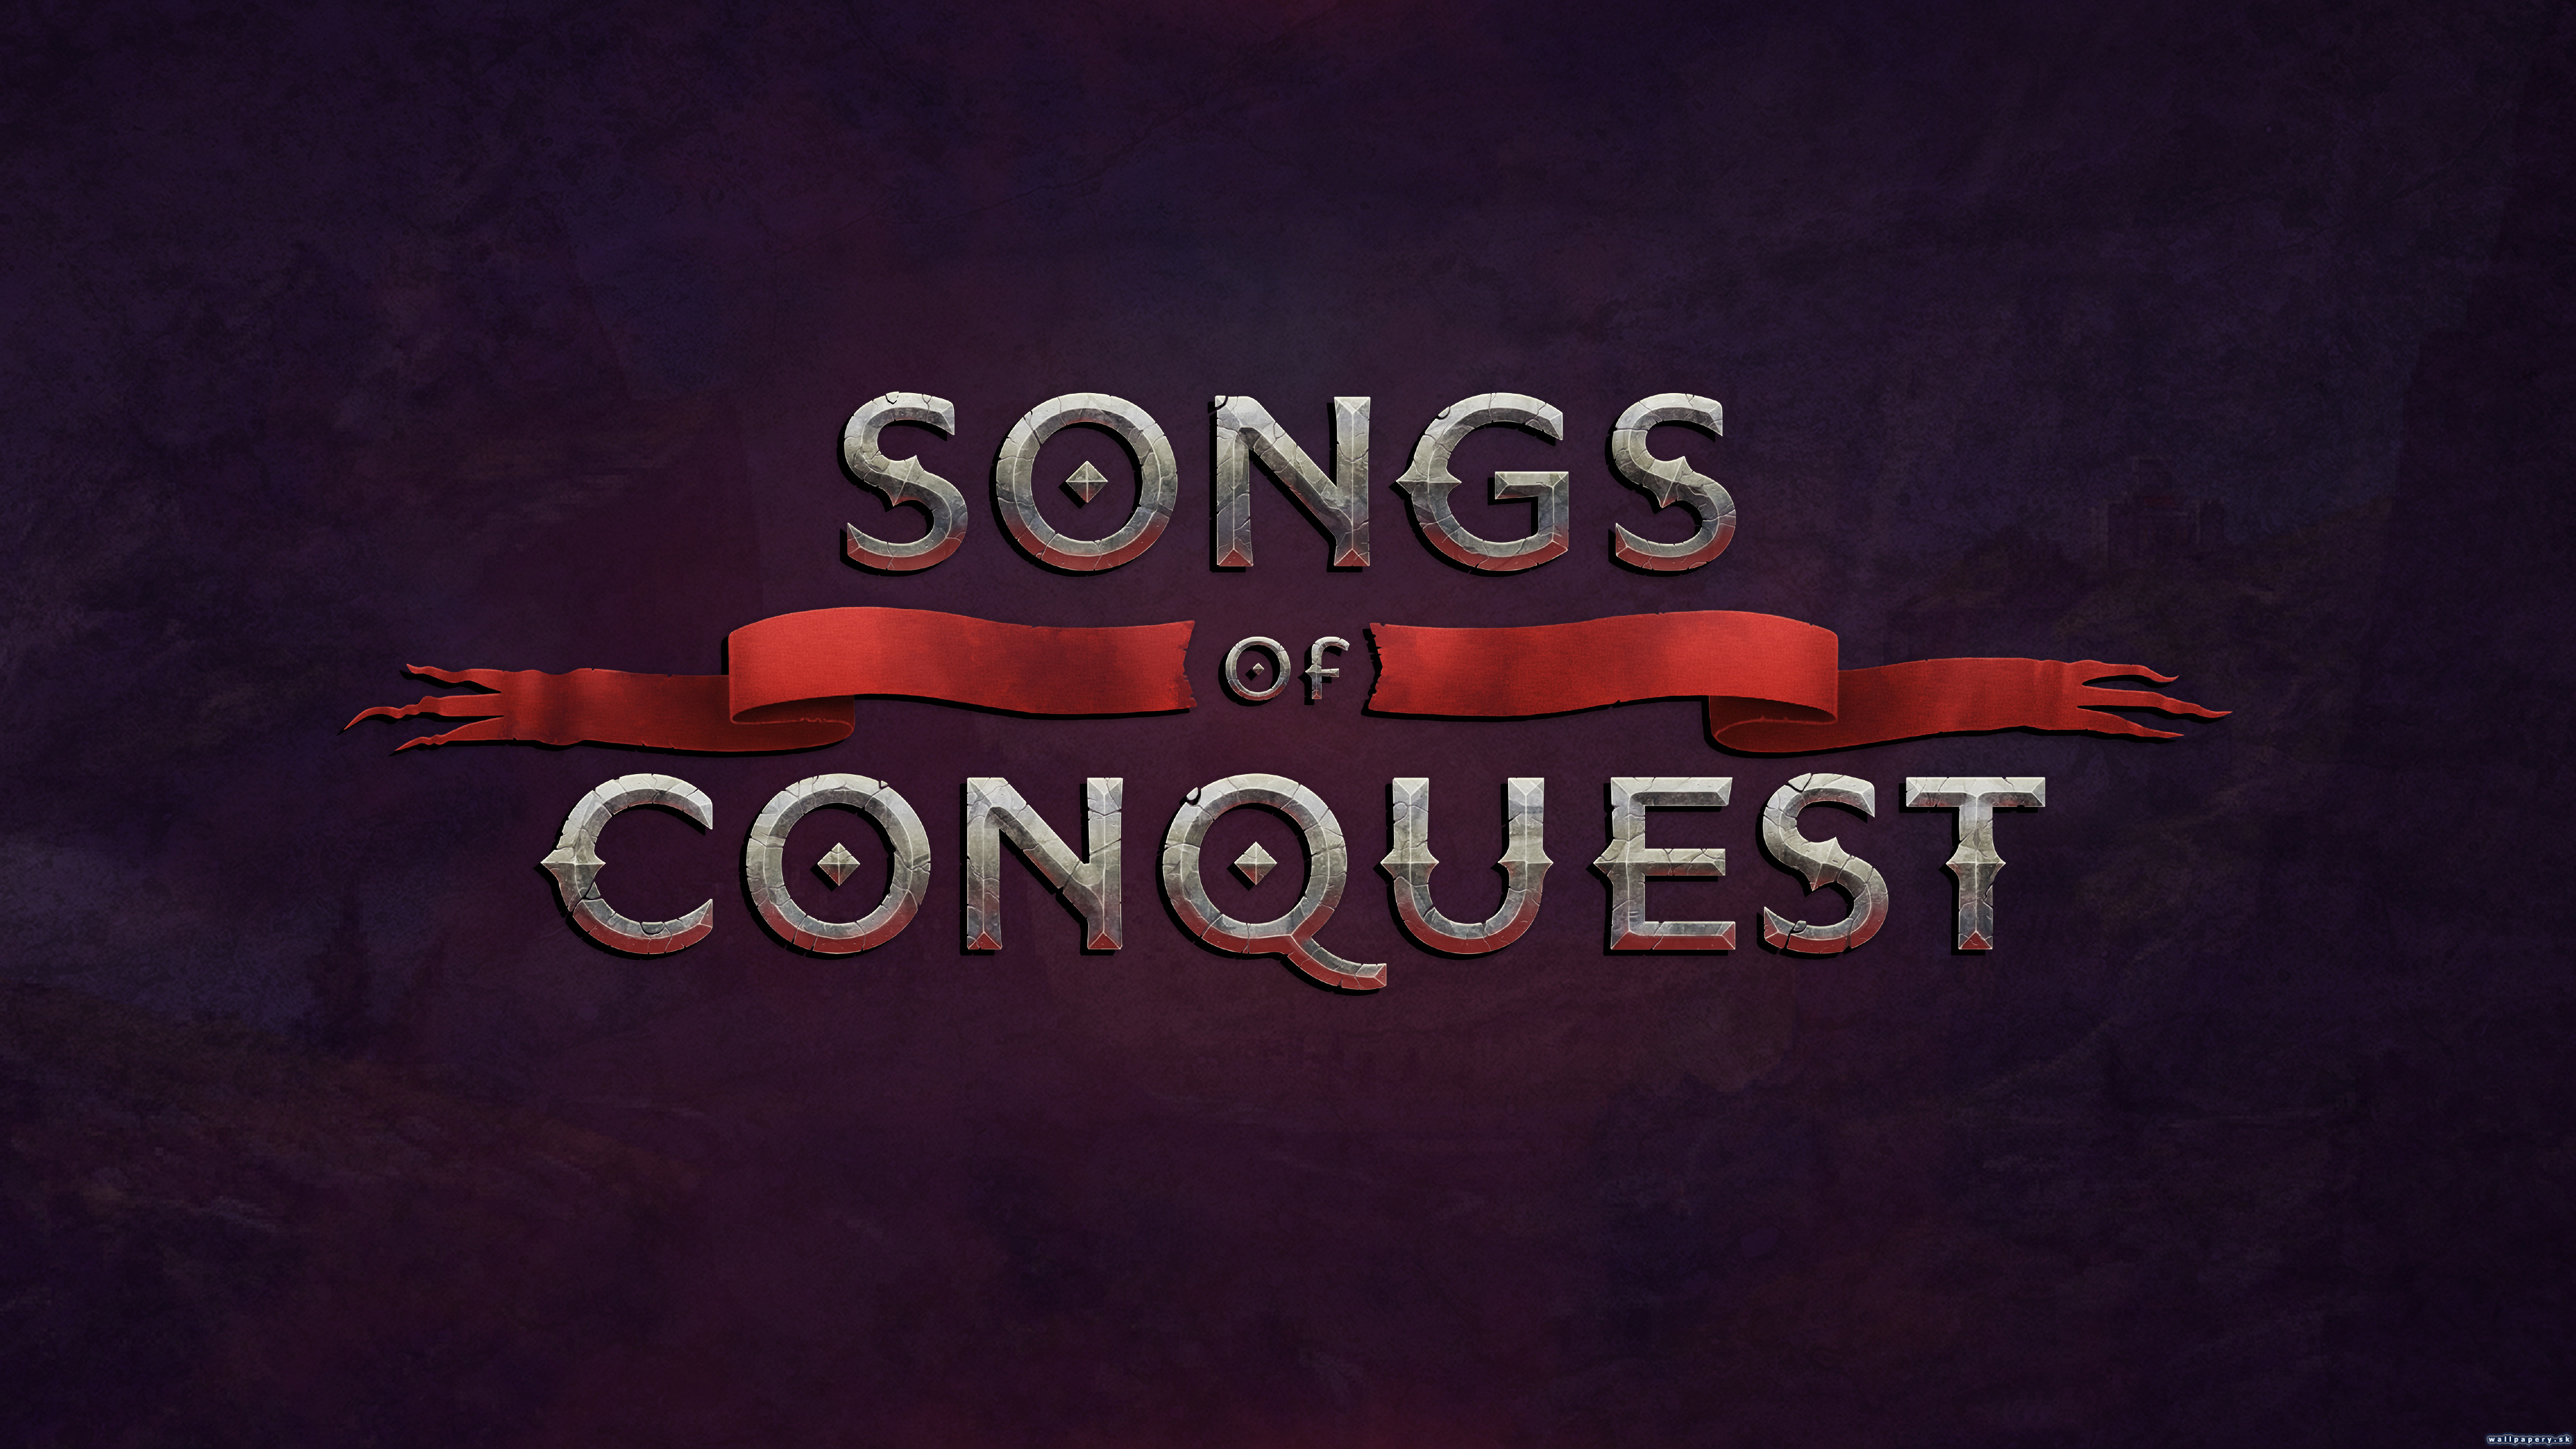 Songs of Conquest - wallpaper 3